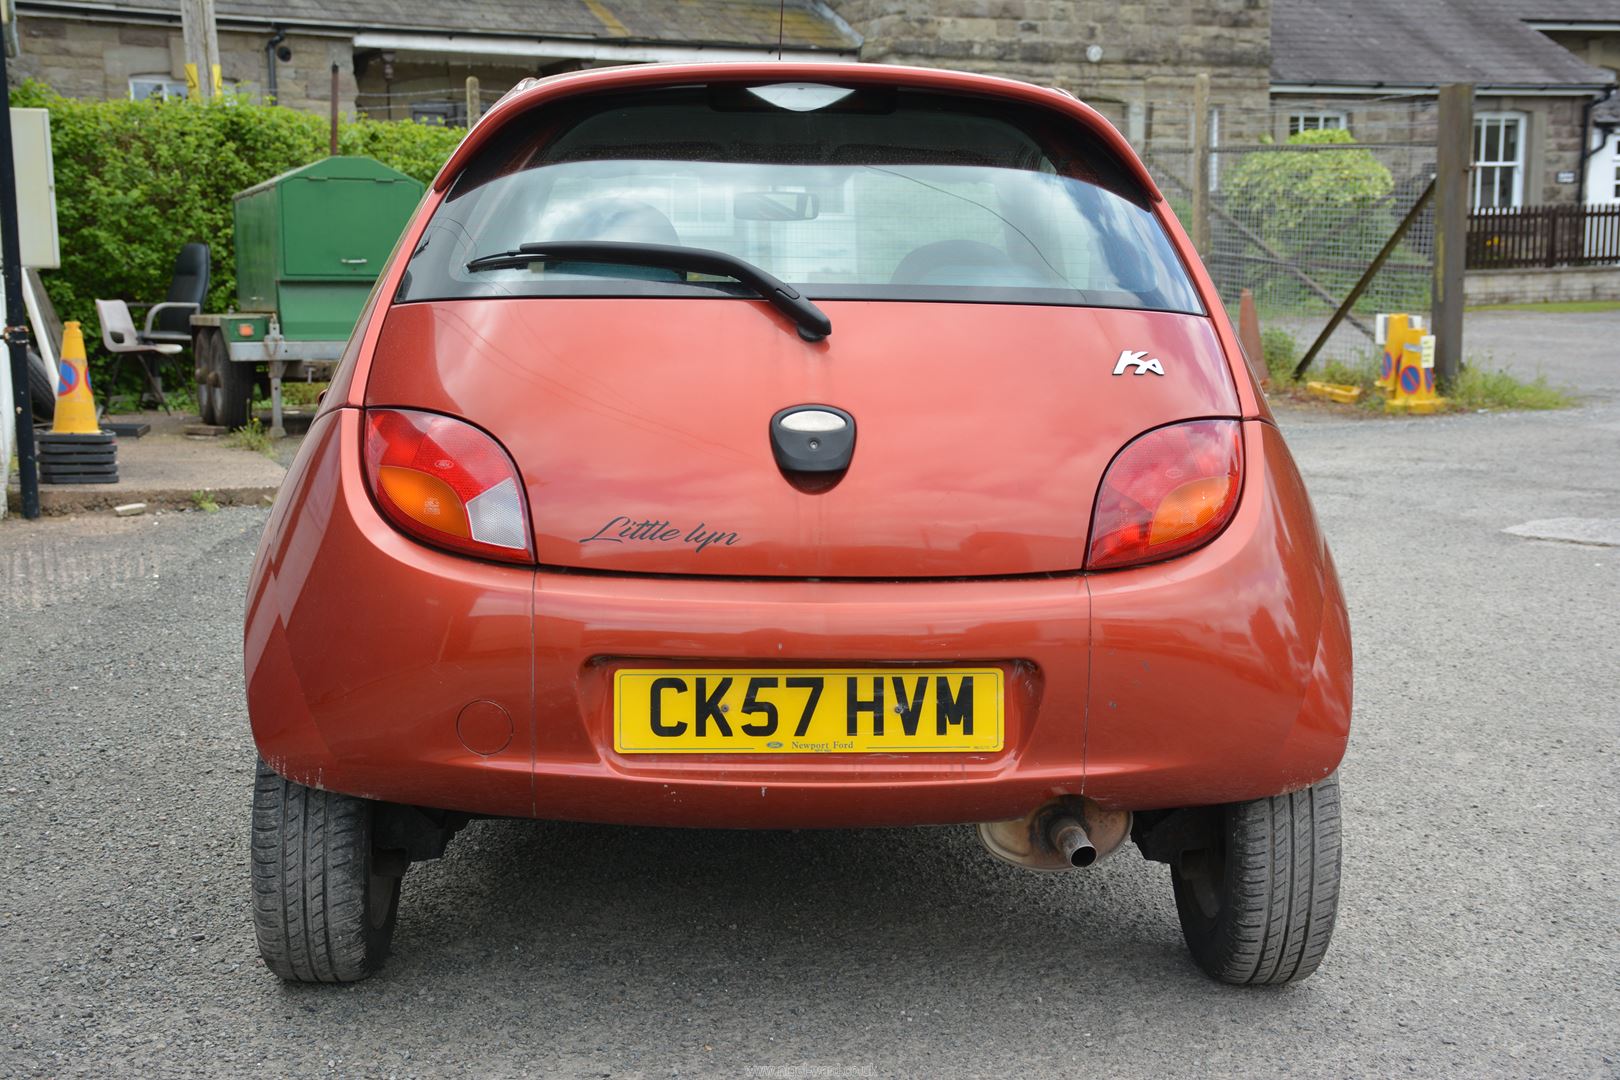 A Ford KA Zetec Climate 1299cc petrol-engined three door hatchback motor Car finished in red, - Image 6 of 14